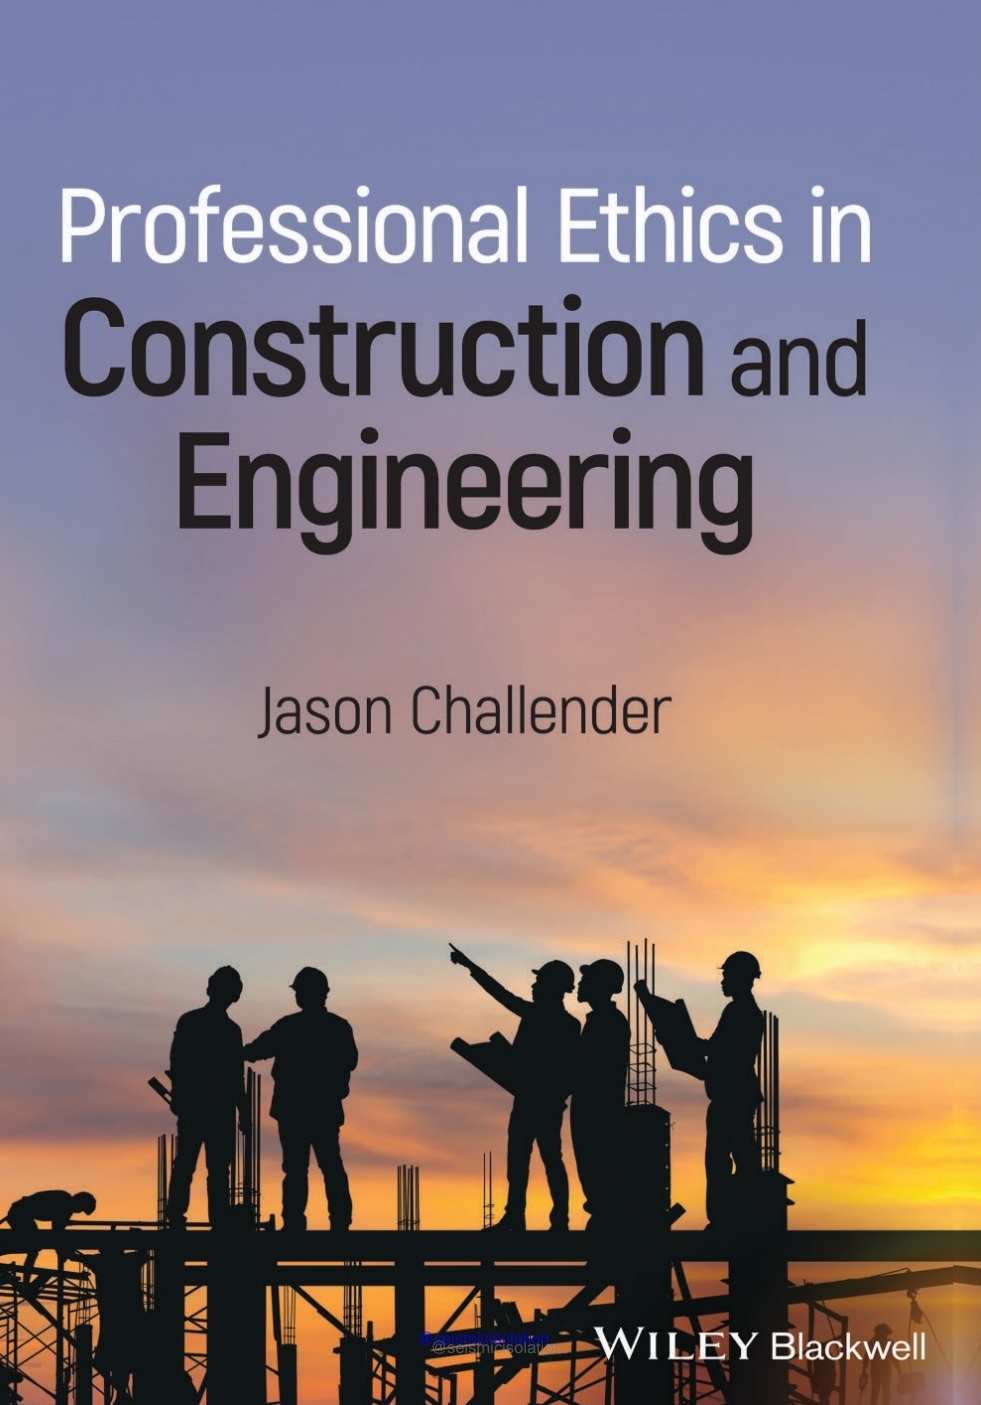 Professional Ethics in Construction and Engineering